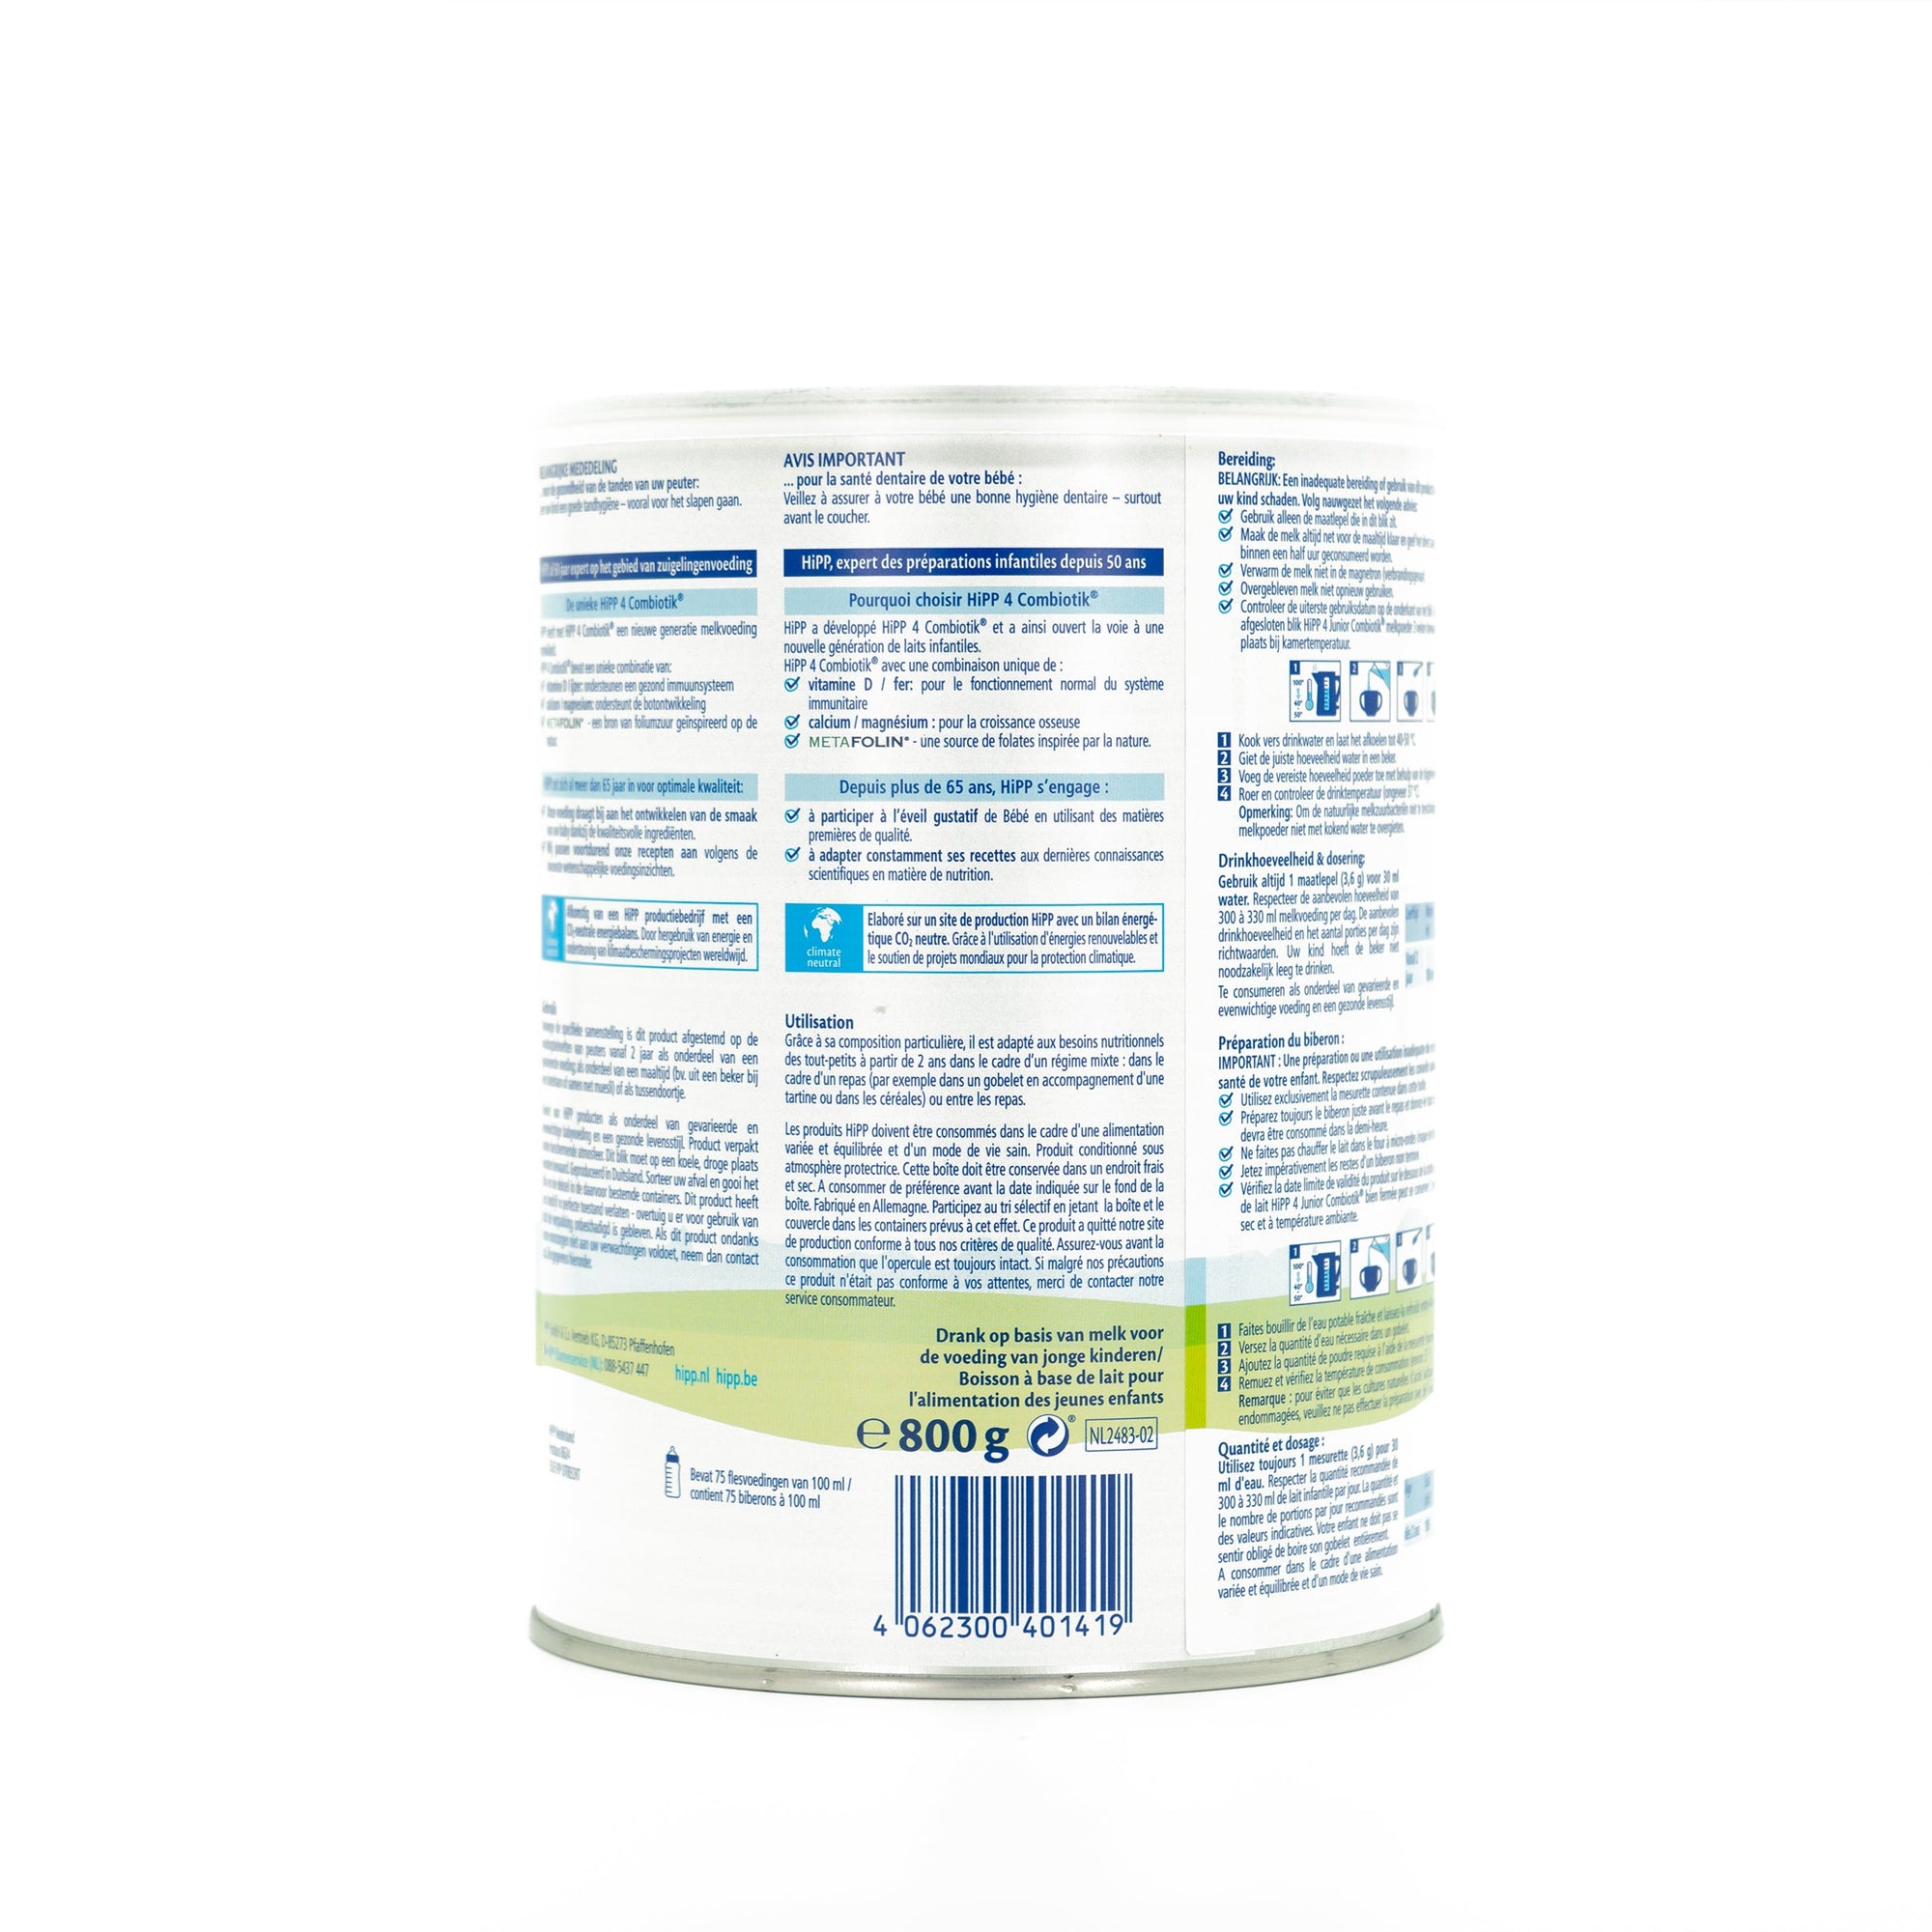 HiPP Dutch Stage 4 Combiotic Baby Formula | Instructions